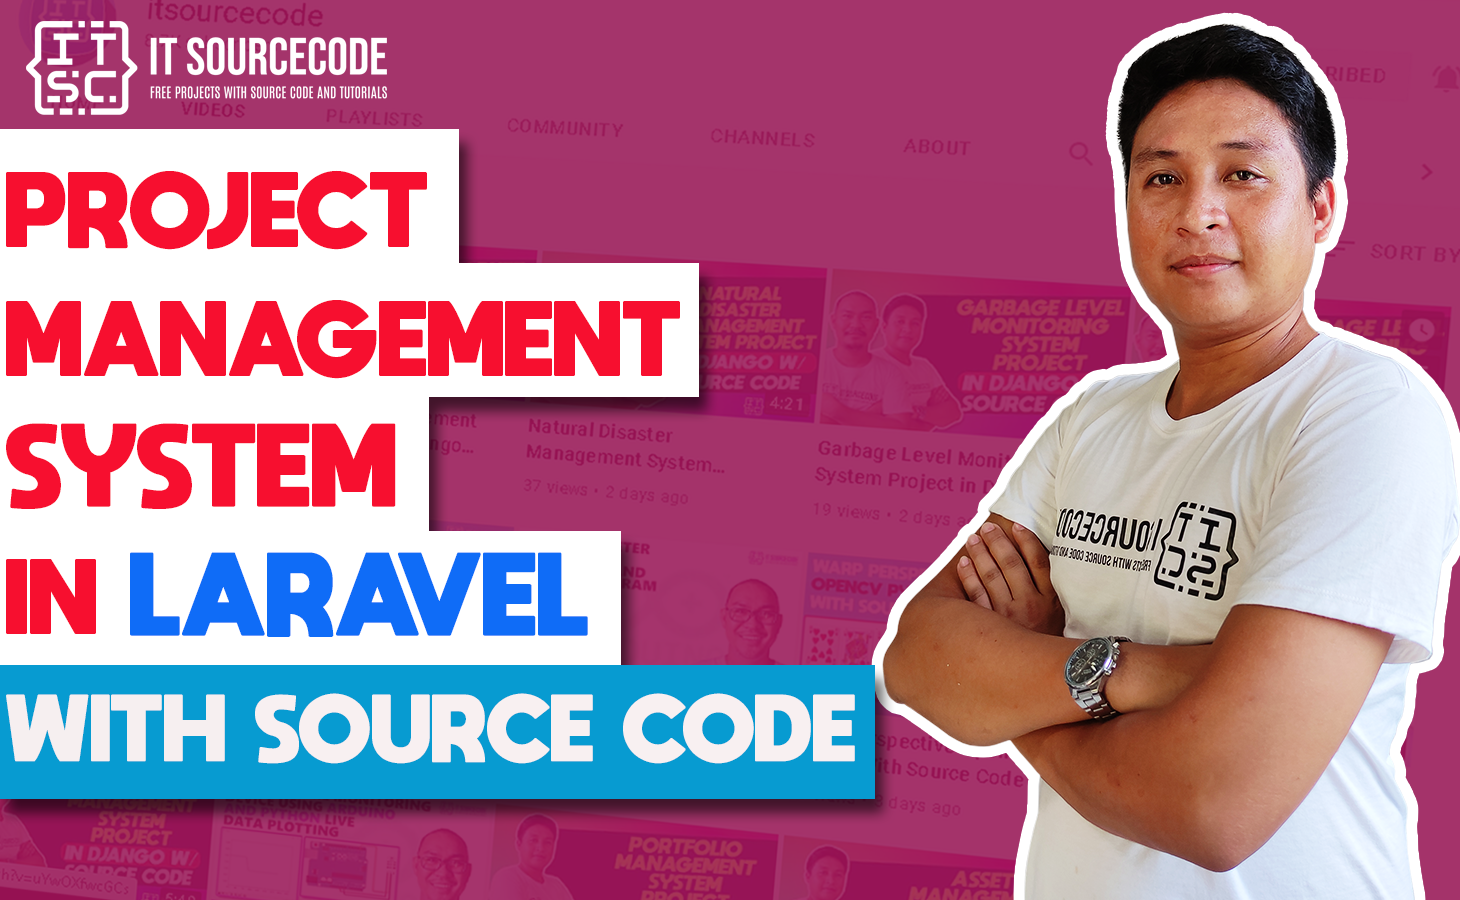 Project Management System in Laravel with Source Code